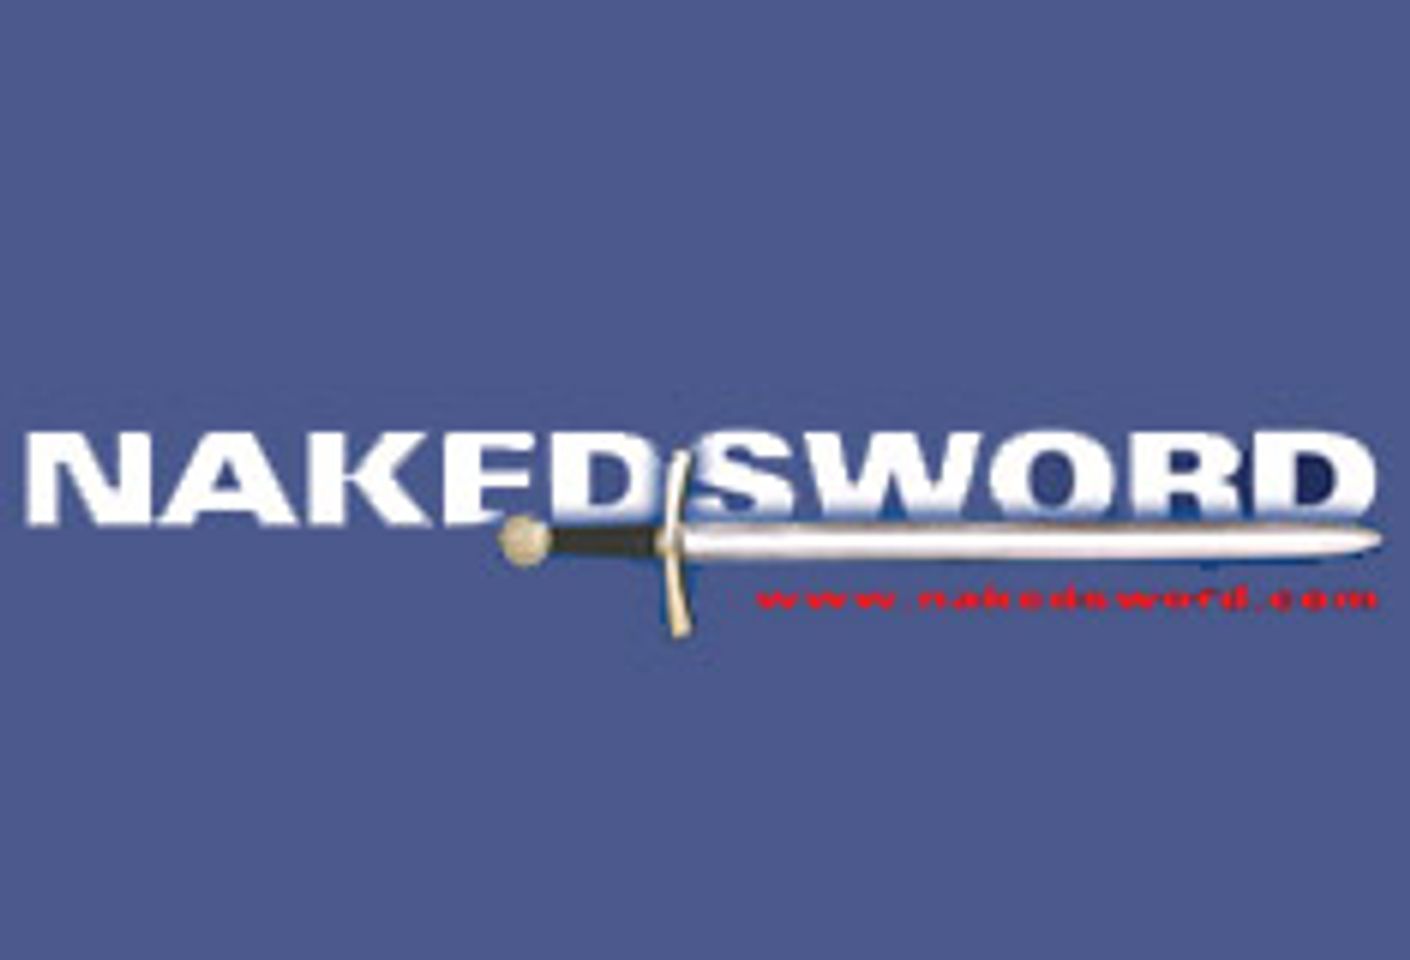 NakedSword Announces Video Podcasts of Tim and Roma Show